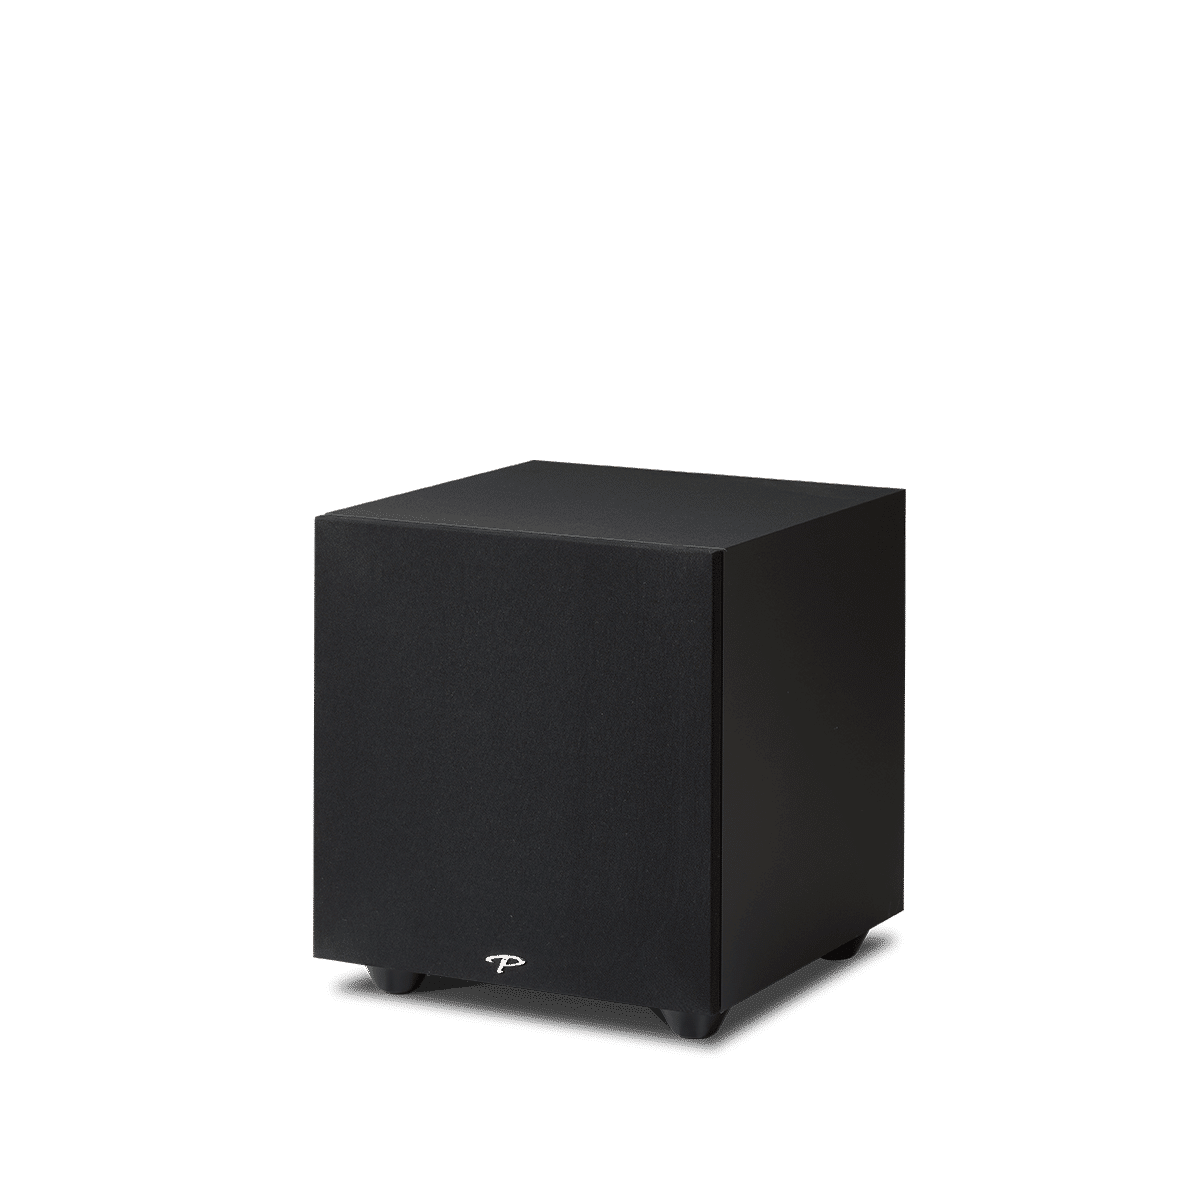 Paradigm Defiance X10 Subwoofer front angled view with grill